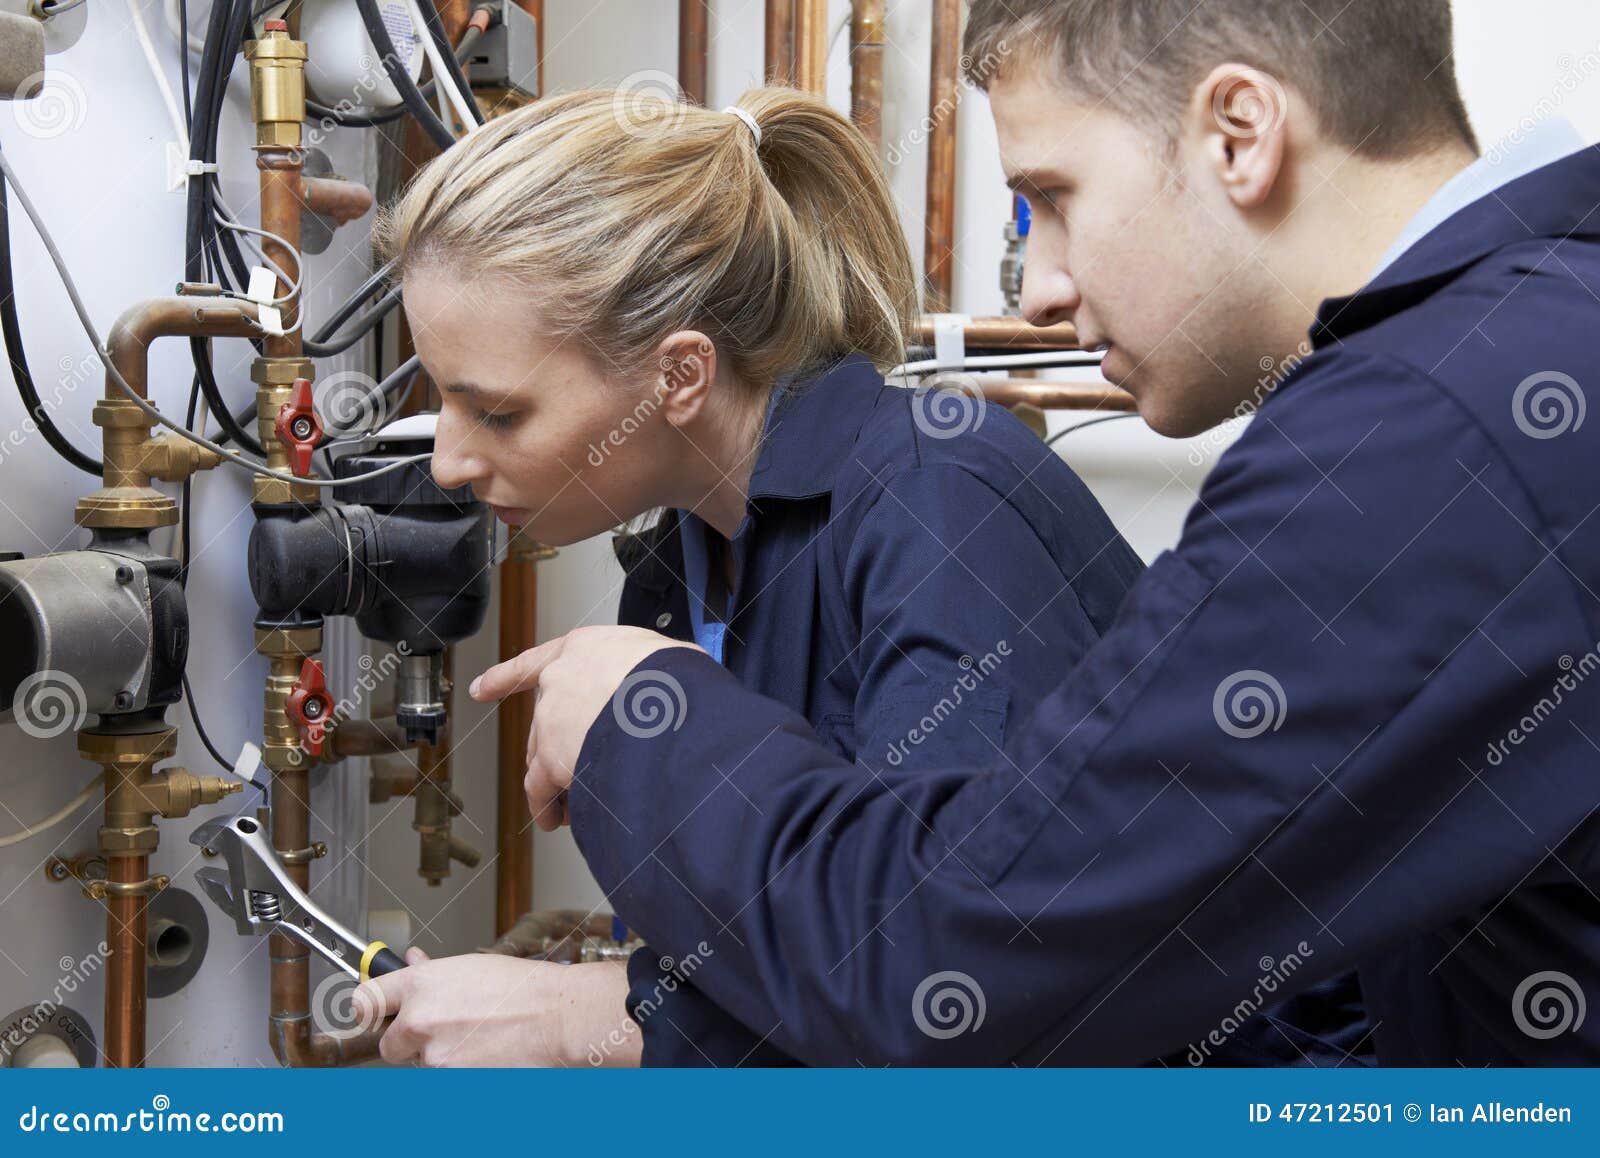 female trainee plumber working on central heating boiler